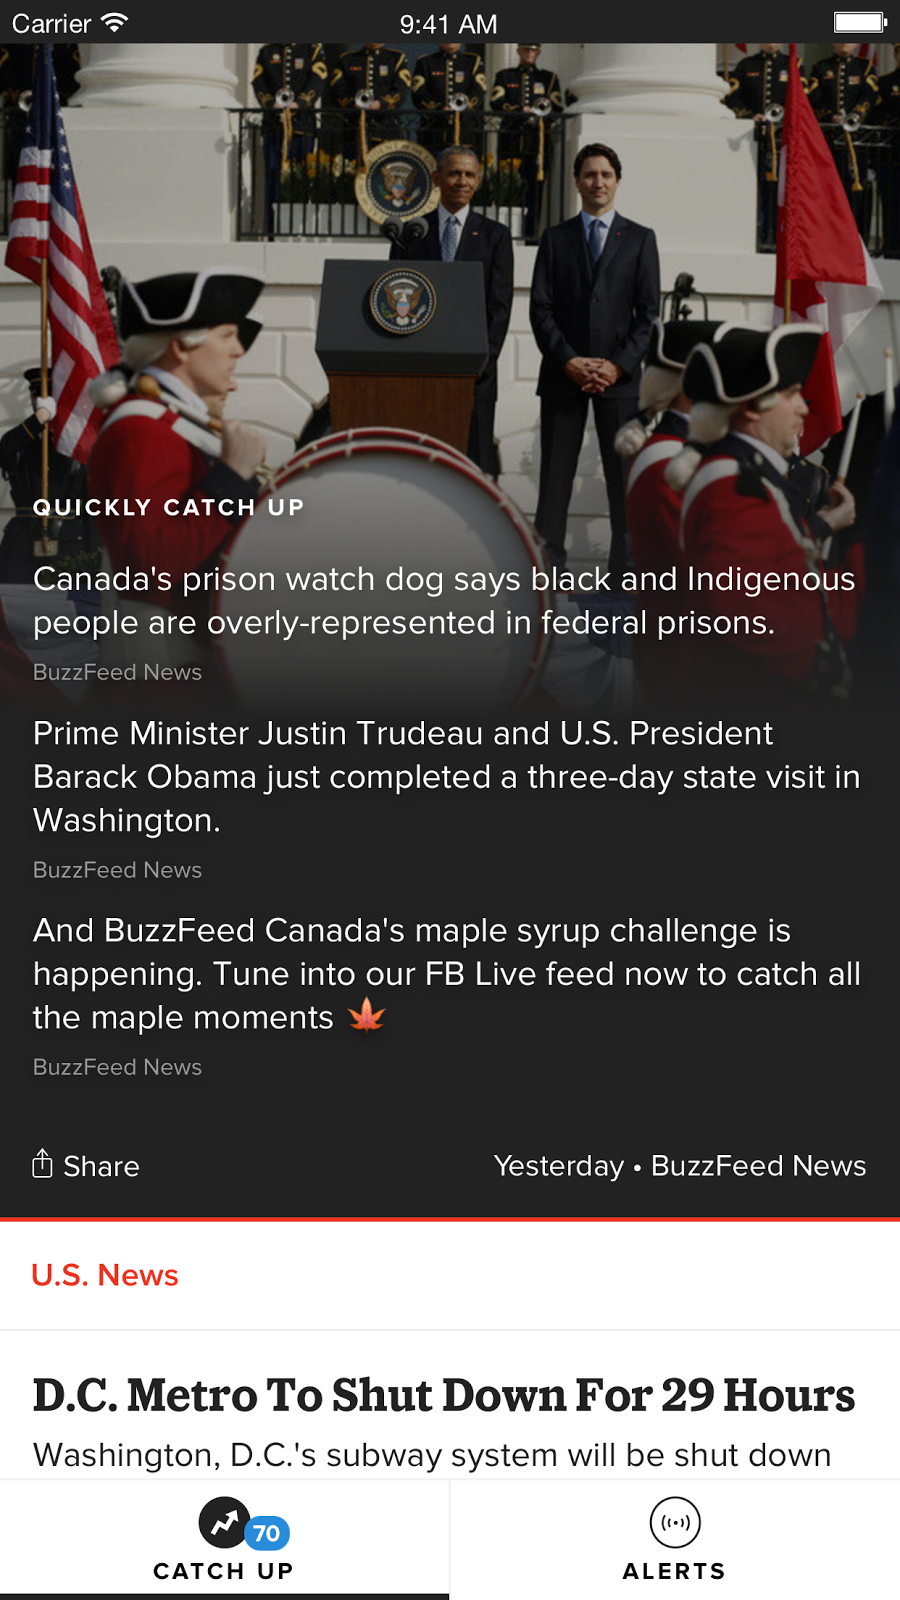 The BuzzFeed news app, which users can customize with notifications from Canada. Photo courtesy of BuzzFeed.